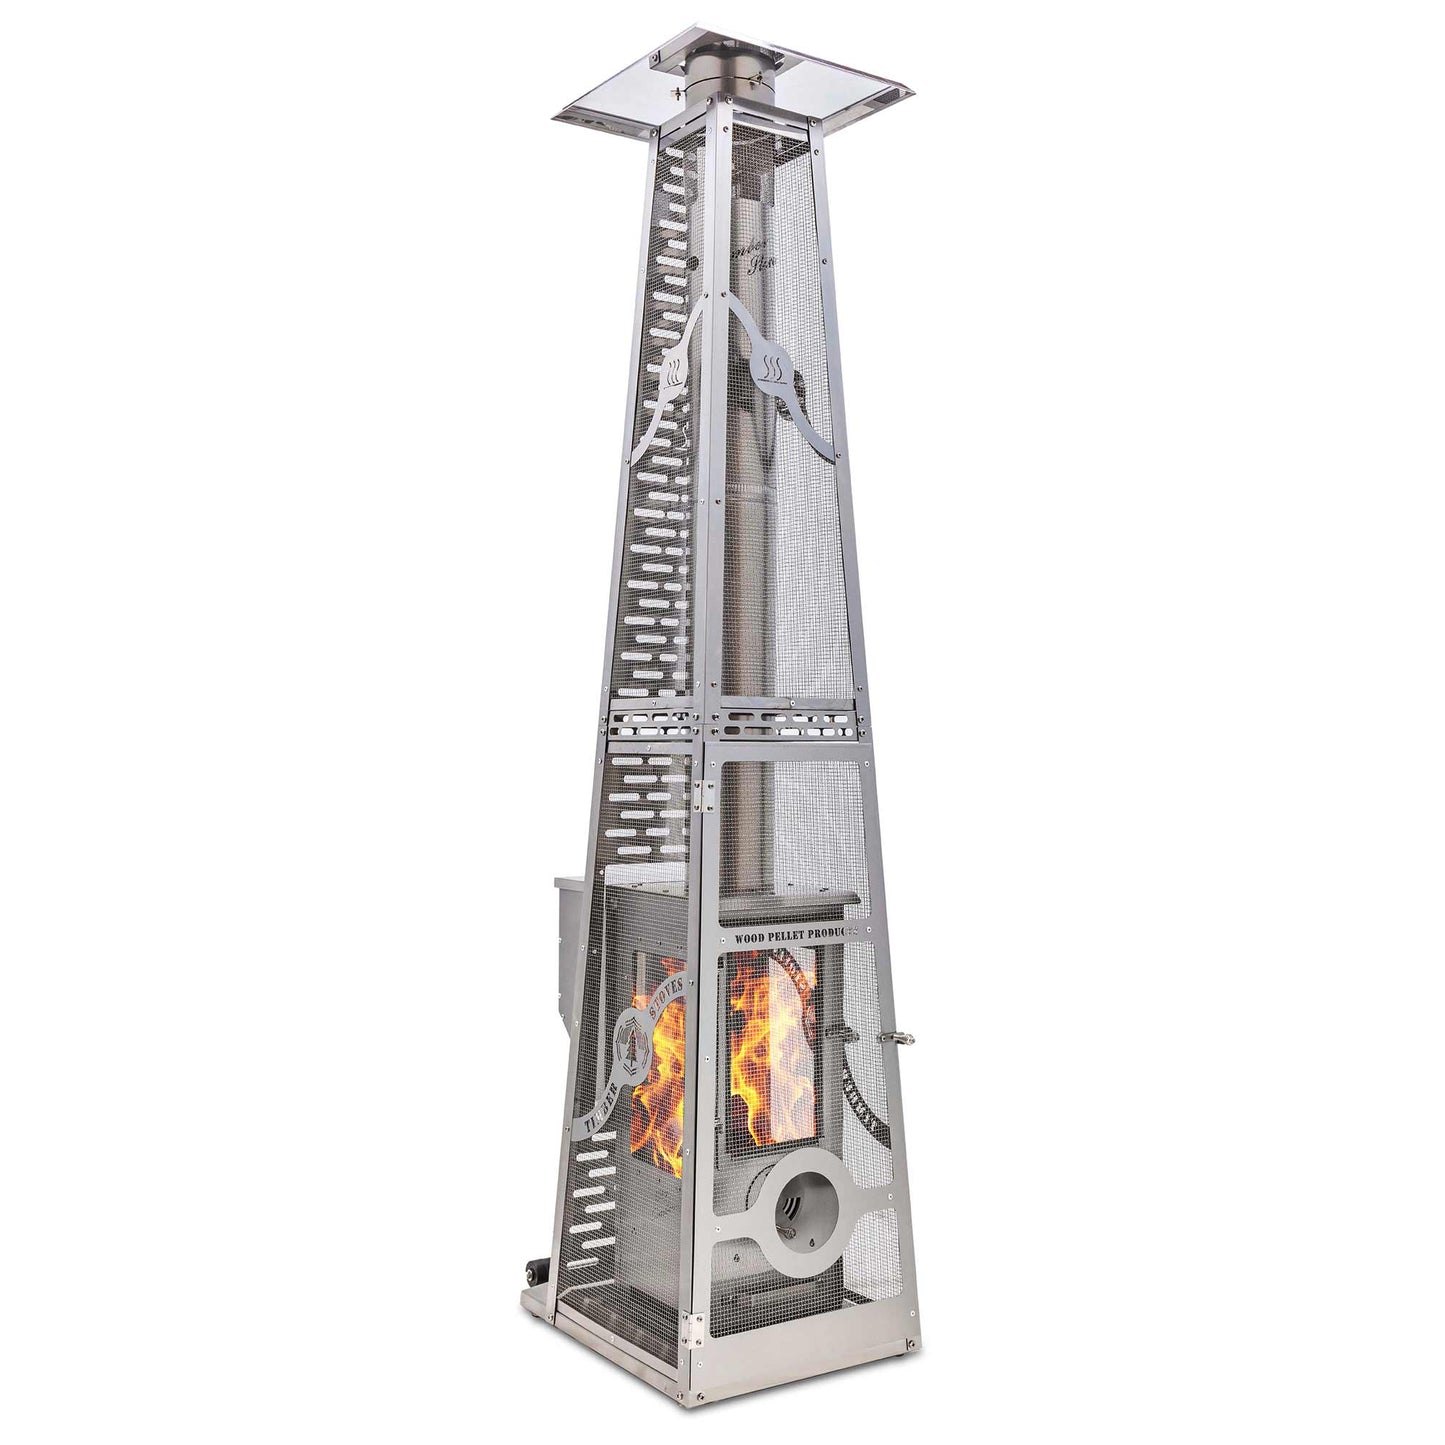 Timber Stoves Stainless Steel Big Timber Elite Safety Cage (Cage Only)